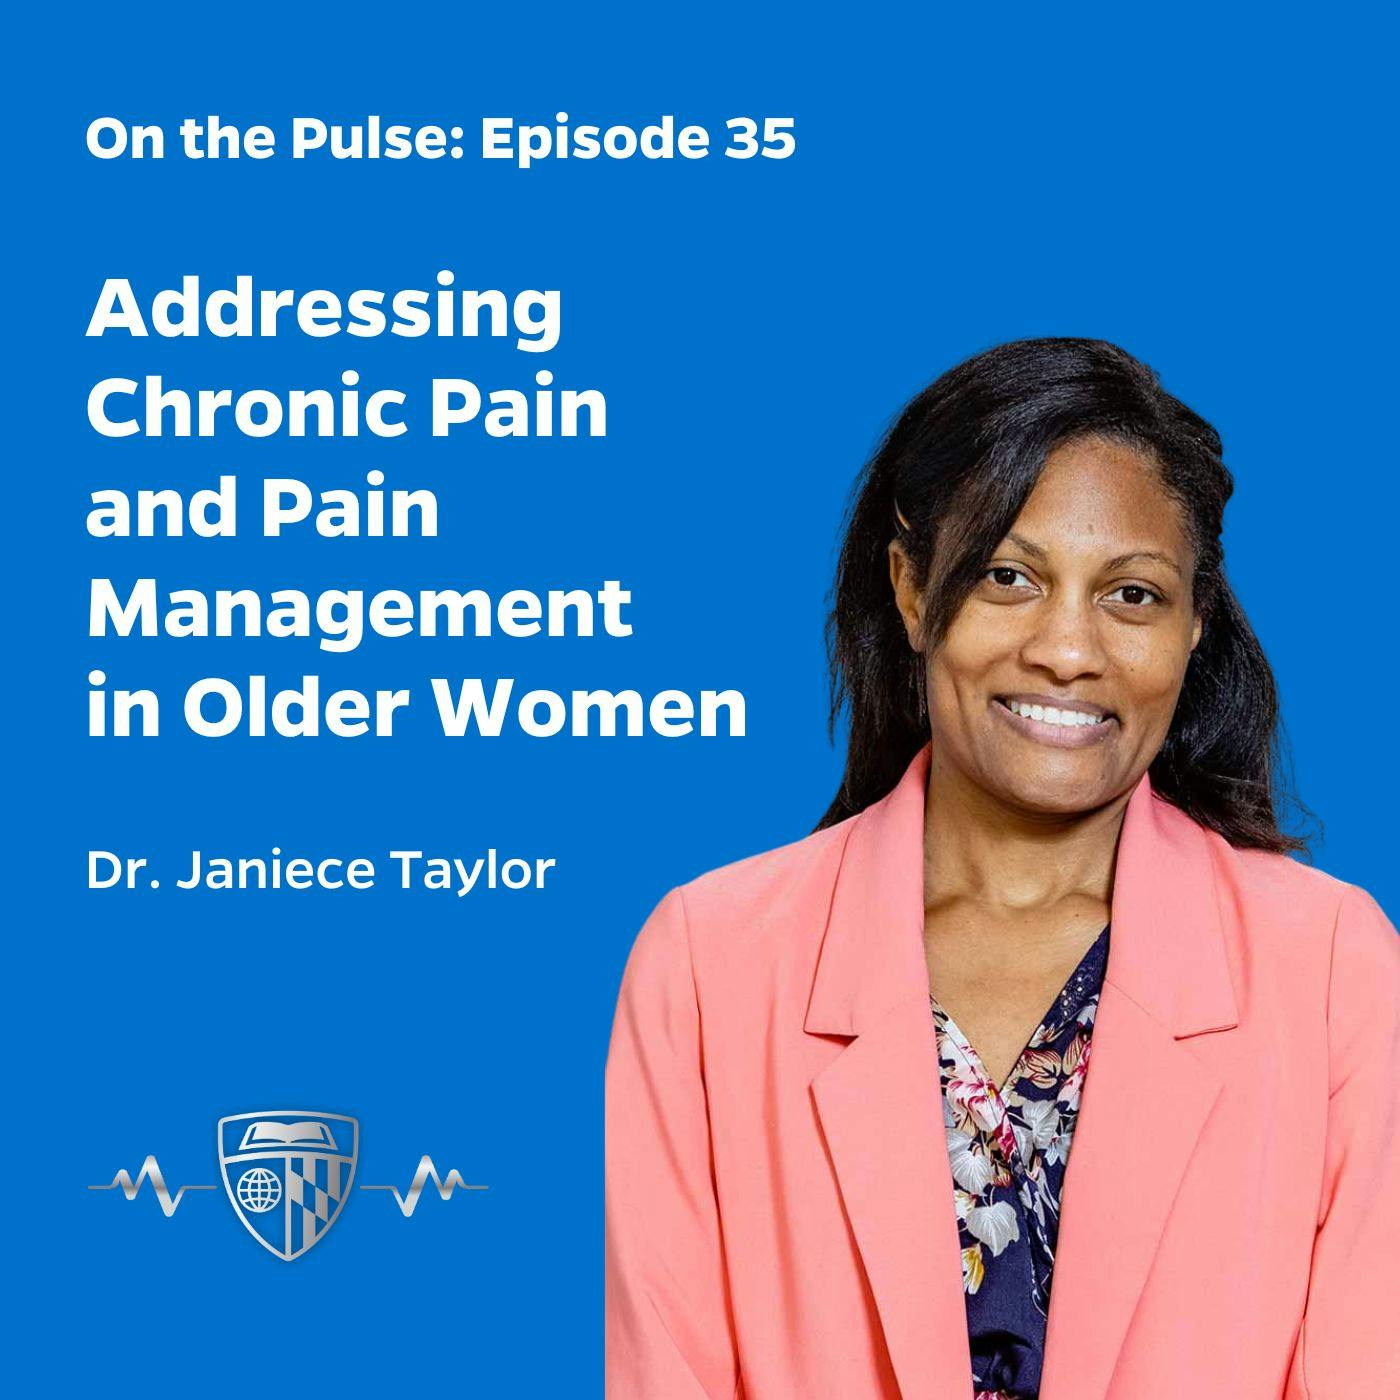 Episode 35: Addressing Chronic Pain and Pain Management in Older Women